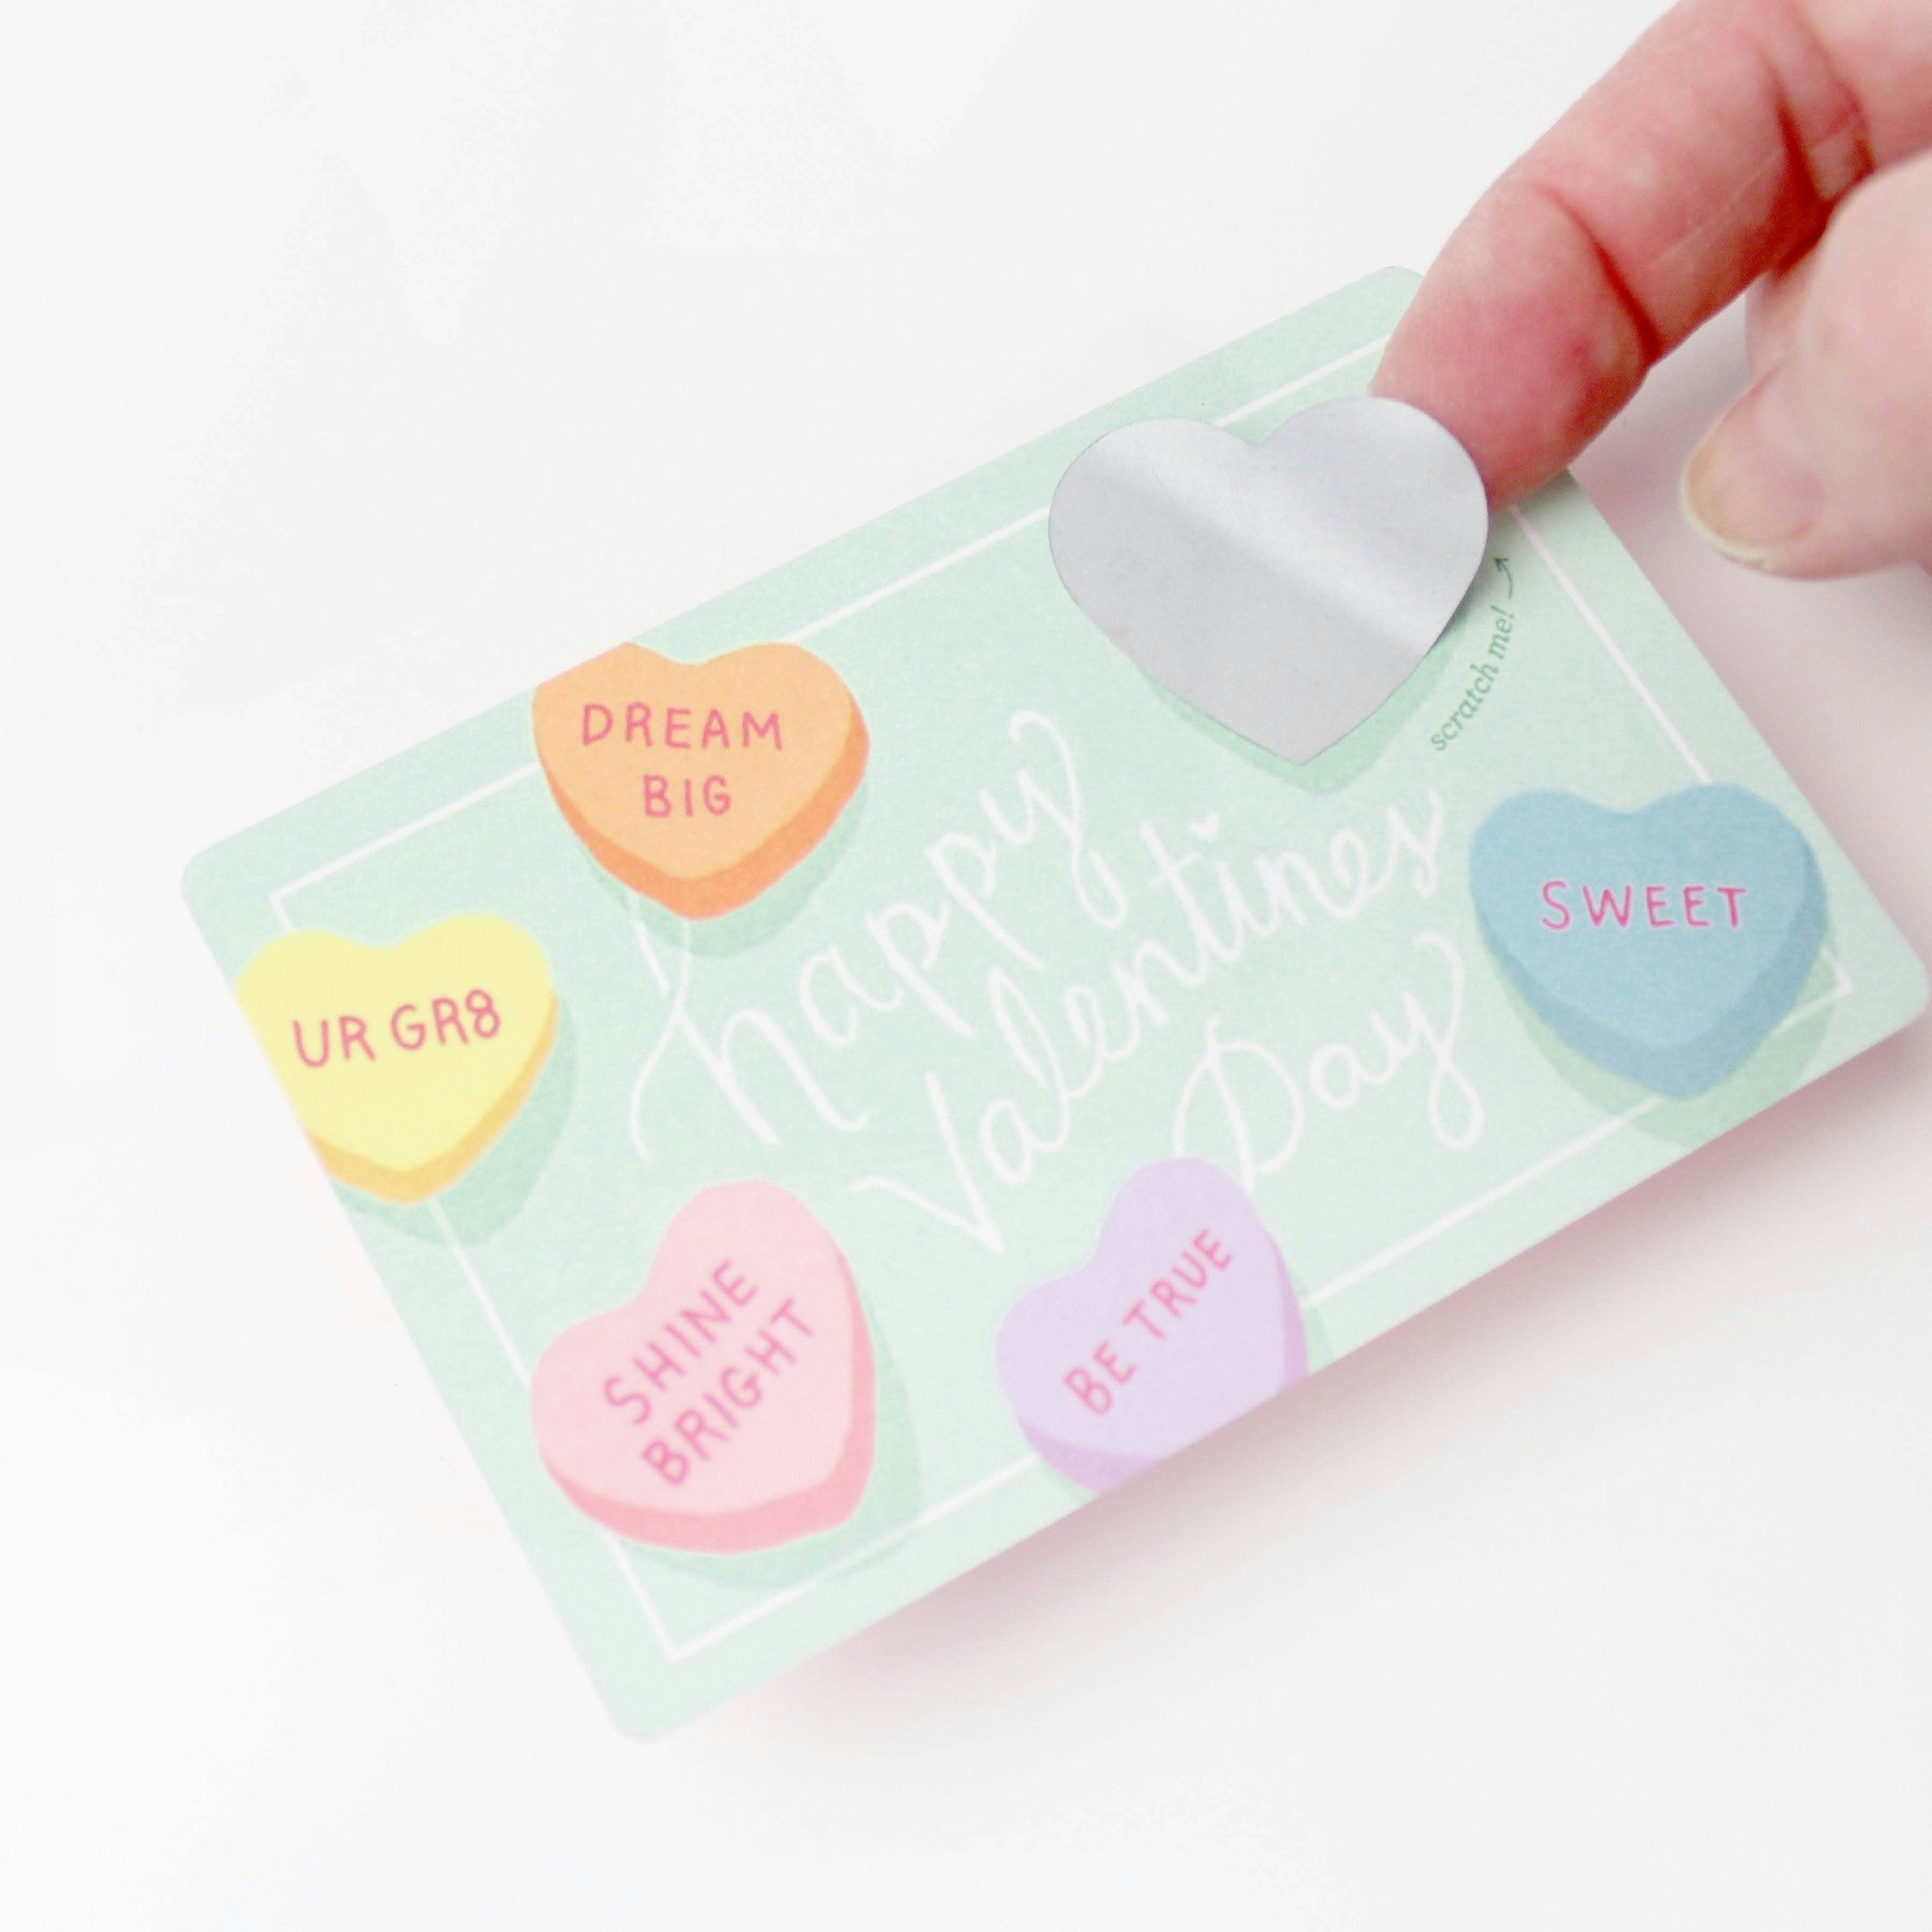 Inkling Paperie - Sweetheart Scratch off Cards - 3pk